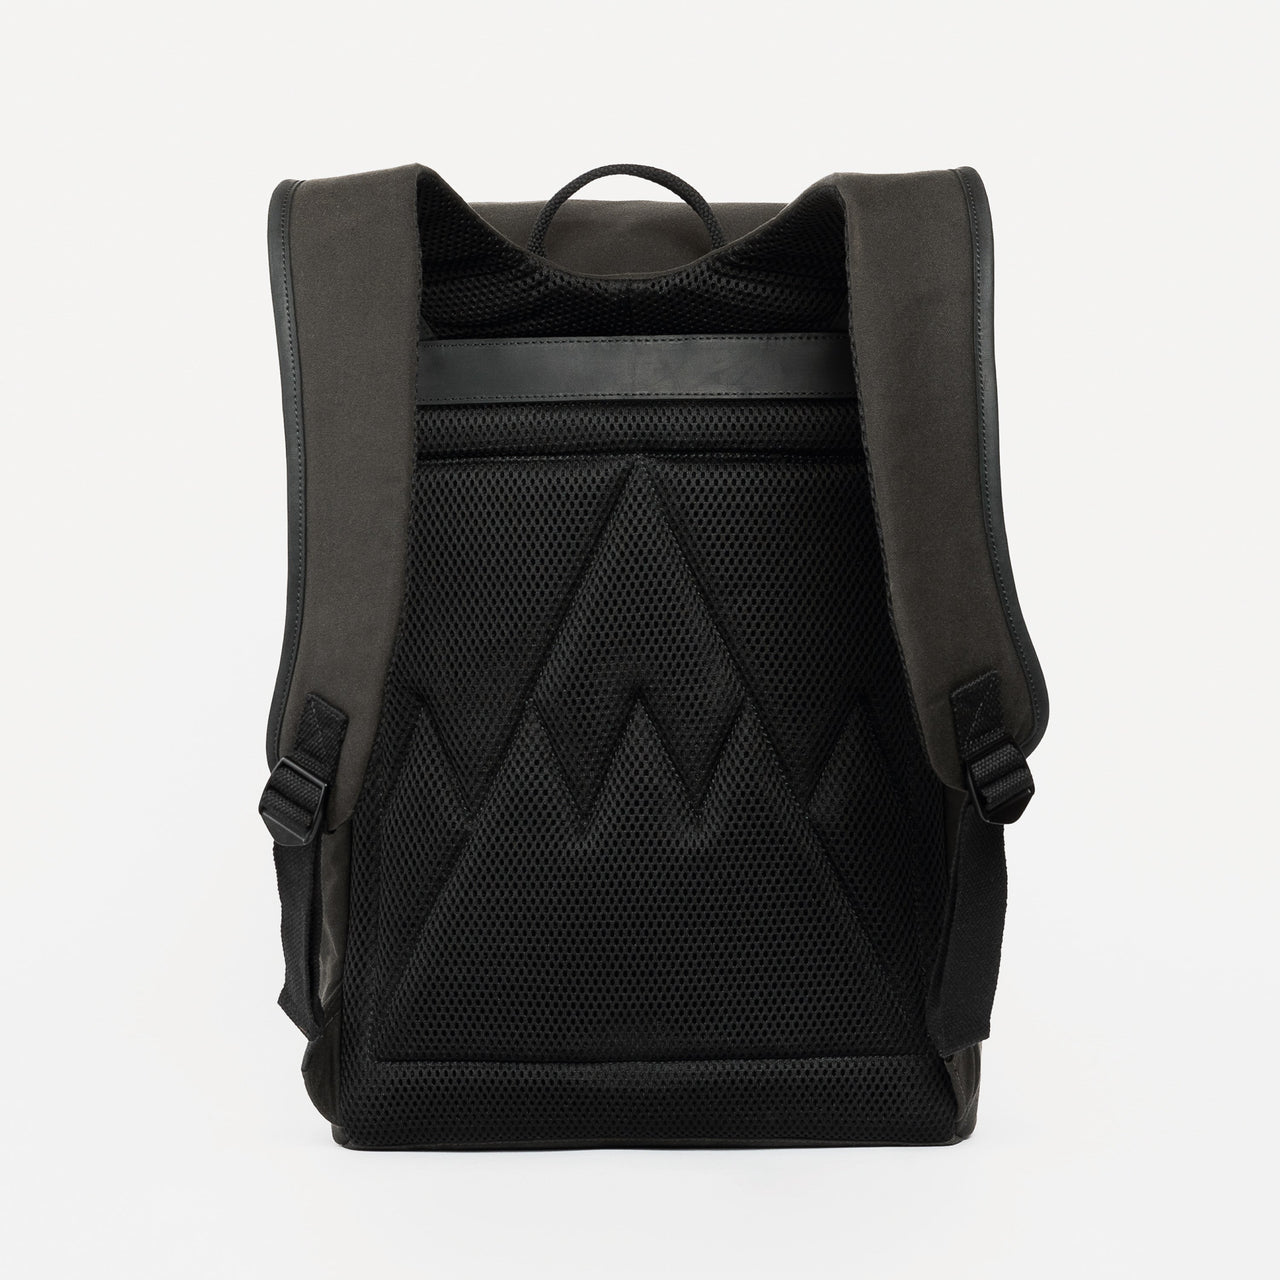 The Backpack in Pirate grey back view